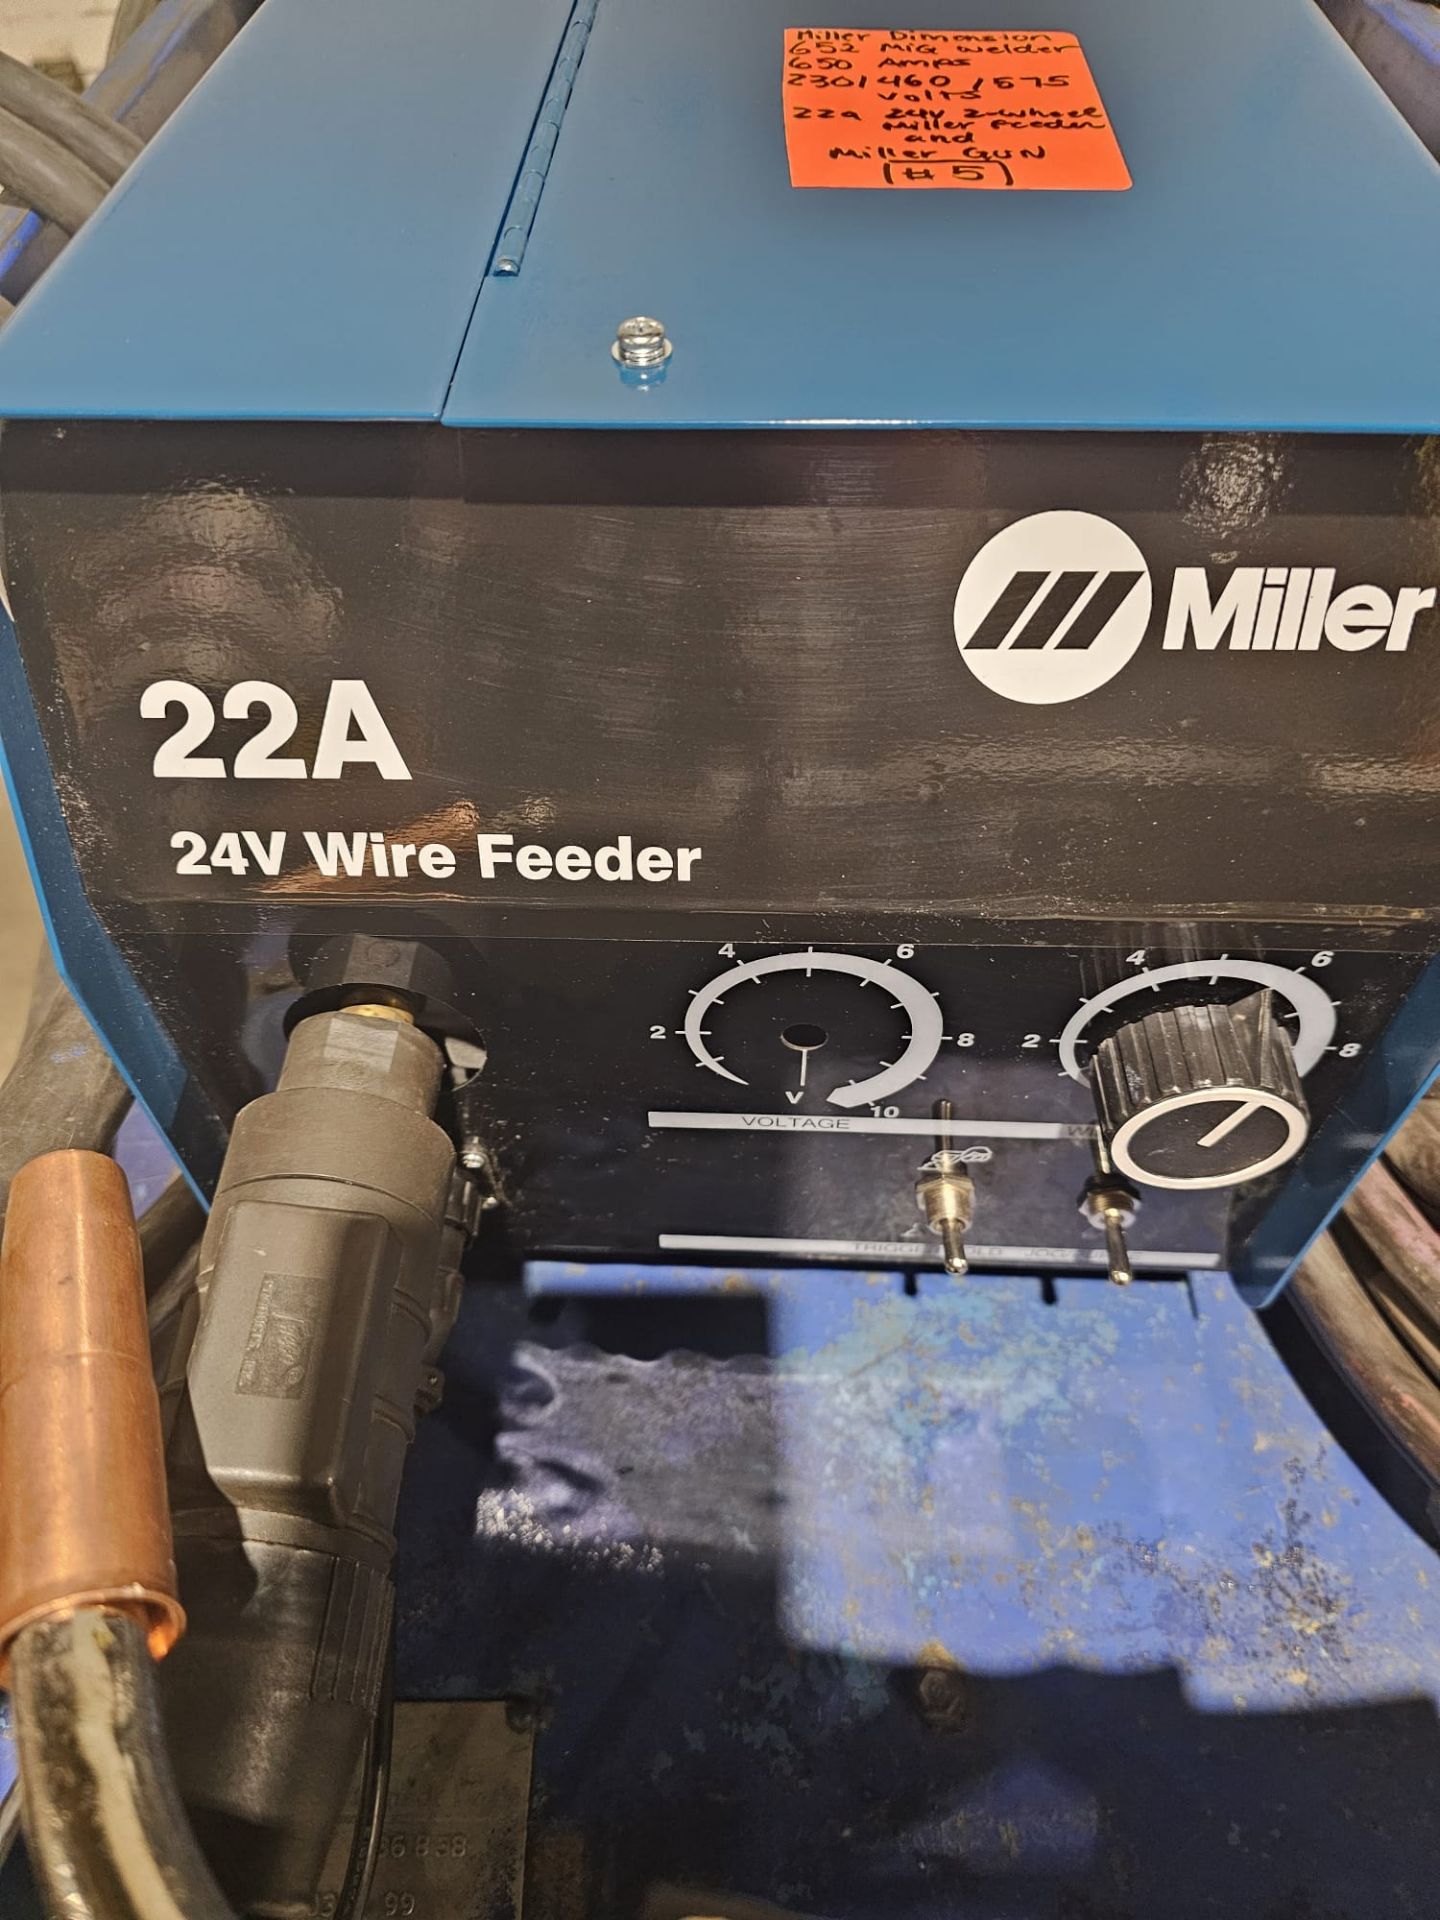 Miller Dimension 652 Mig Welder 650 Amp Mig Tig Stick Multi Process Power Source with 22A Wire - Image 8 of 9